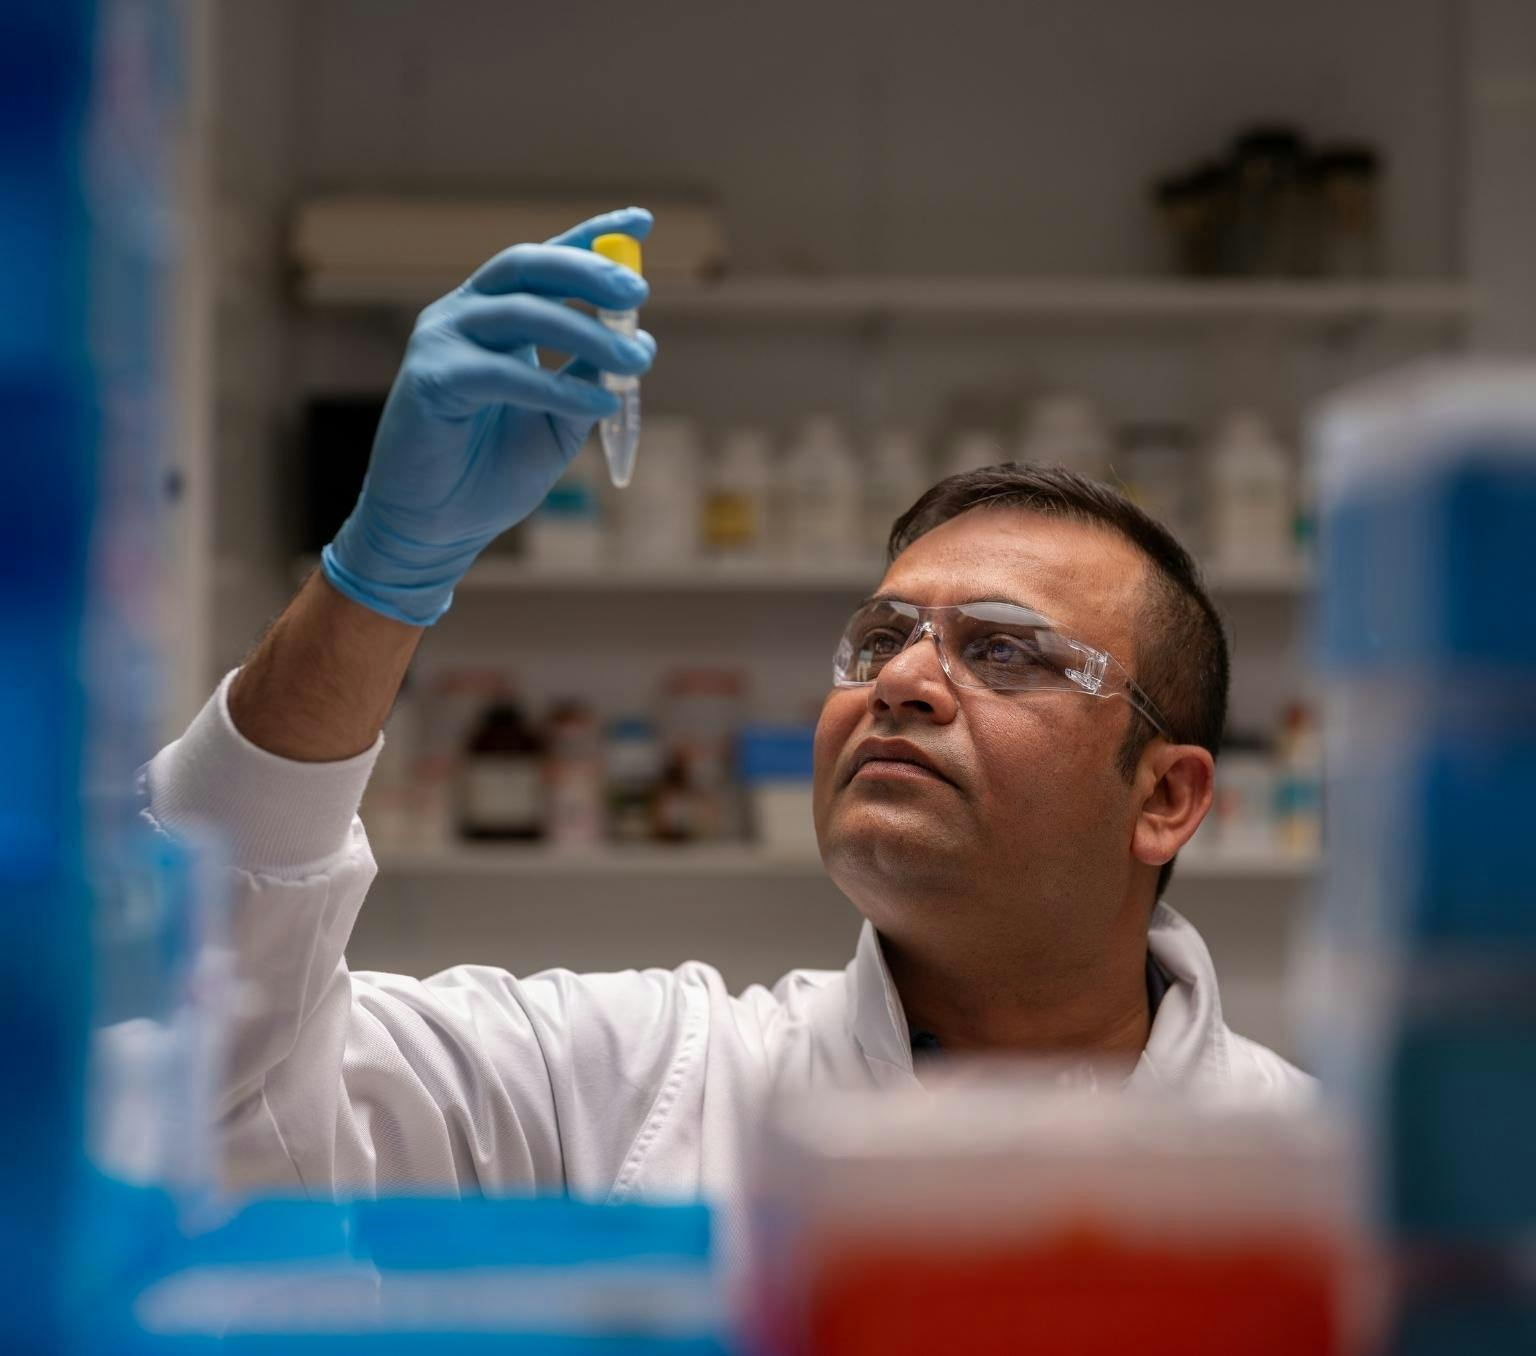 Dr Hardip Patel in a science lab holding up a test tube containing an unknown substance